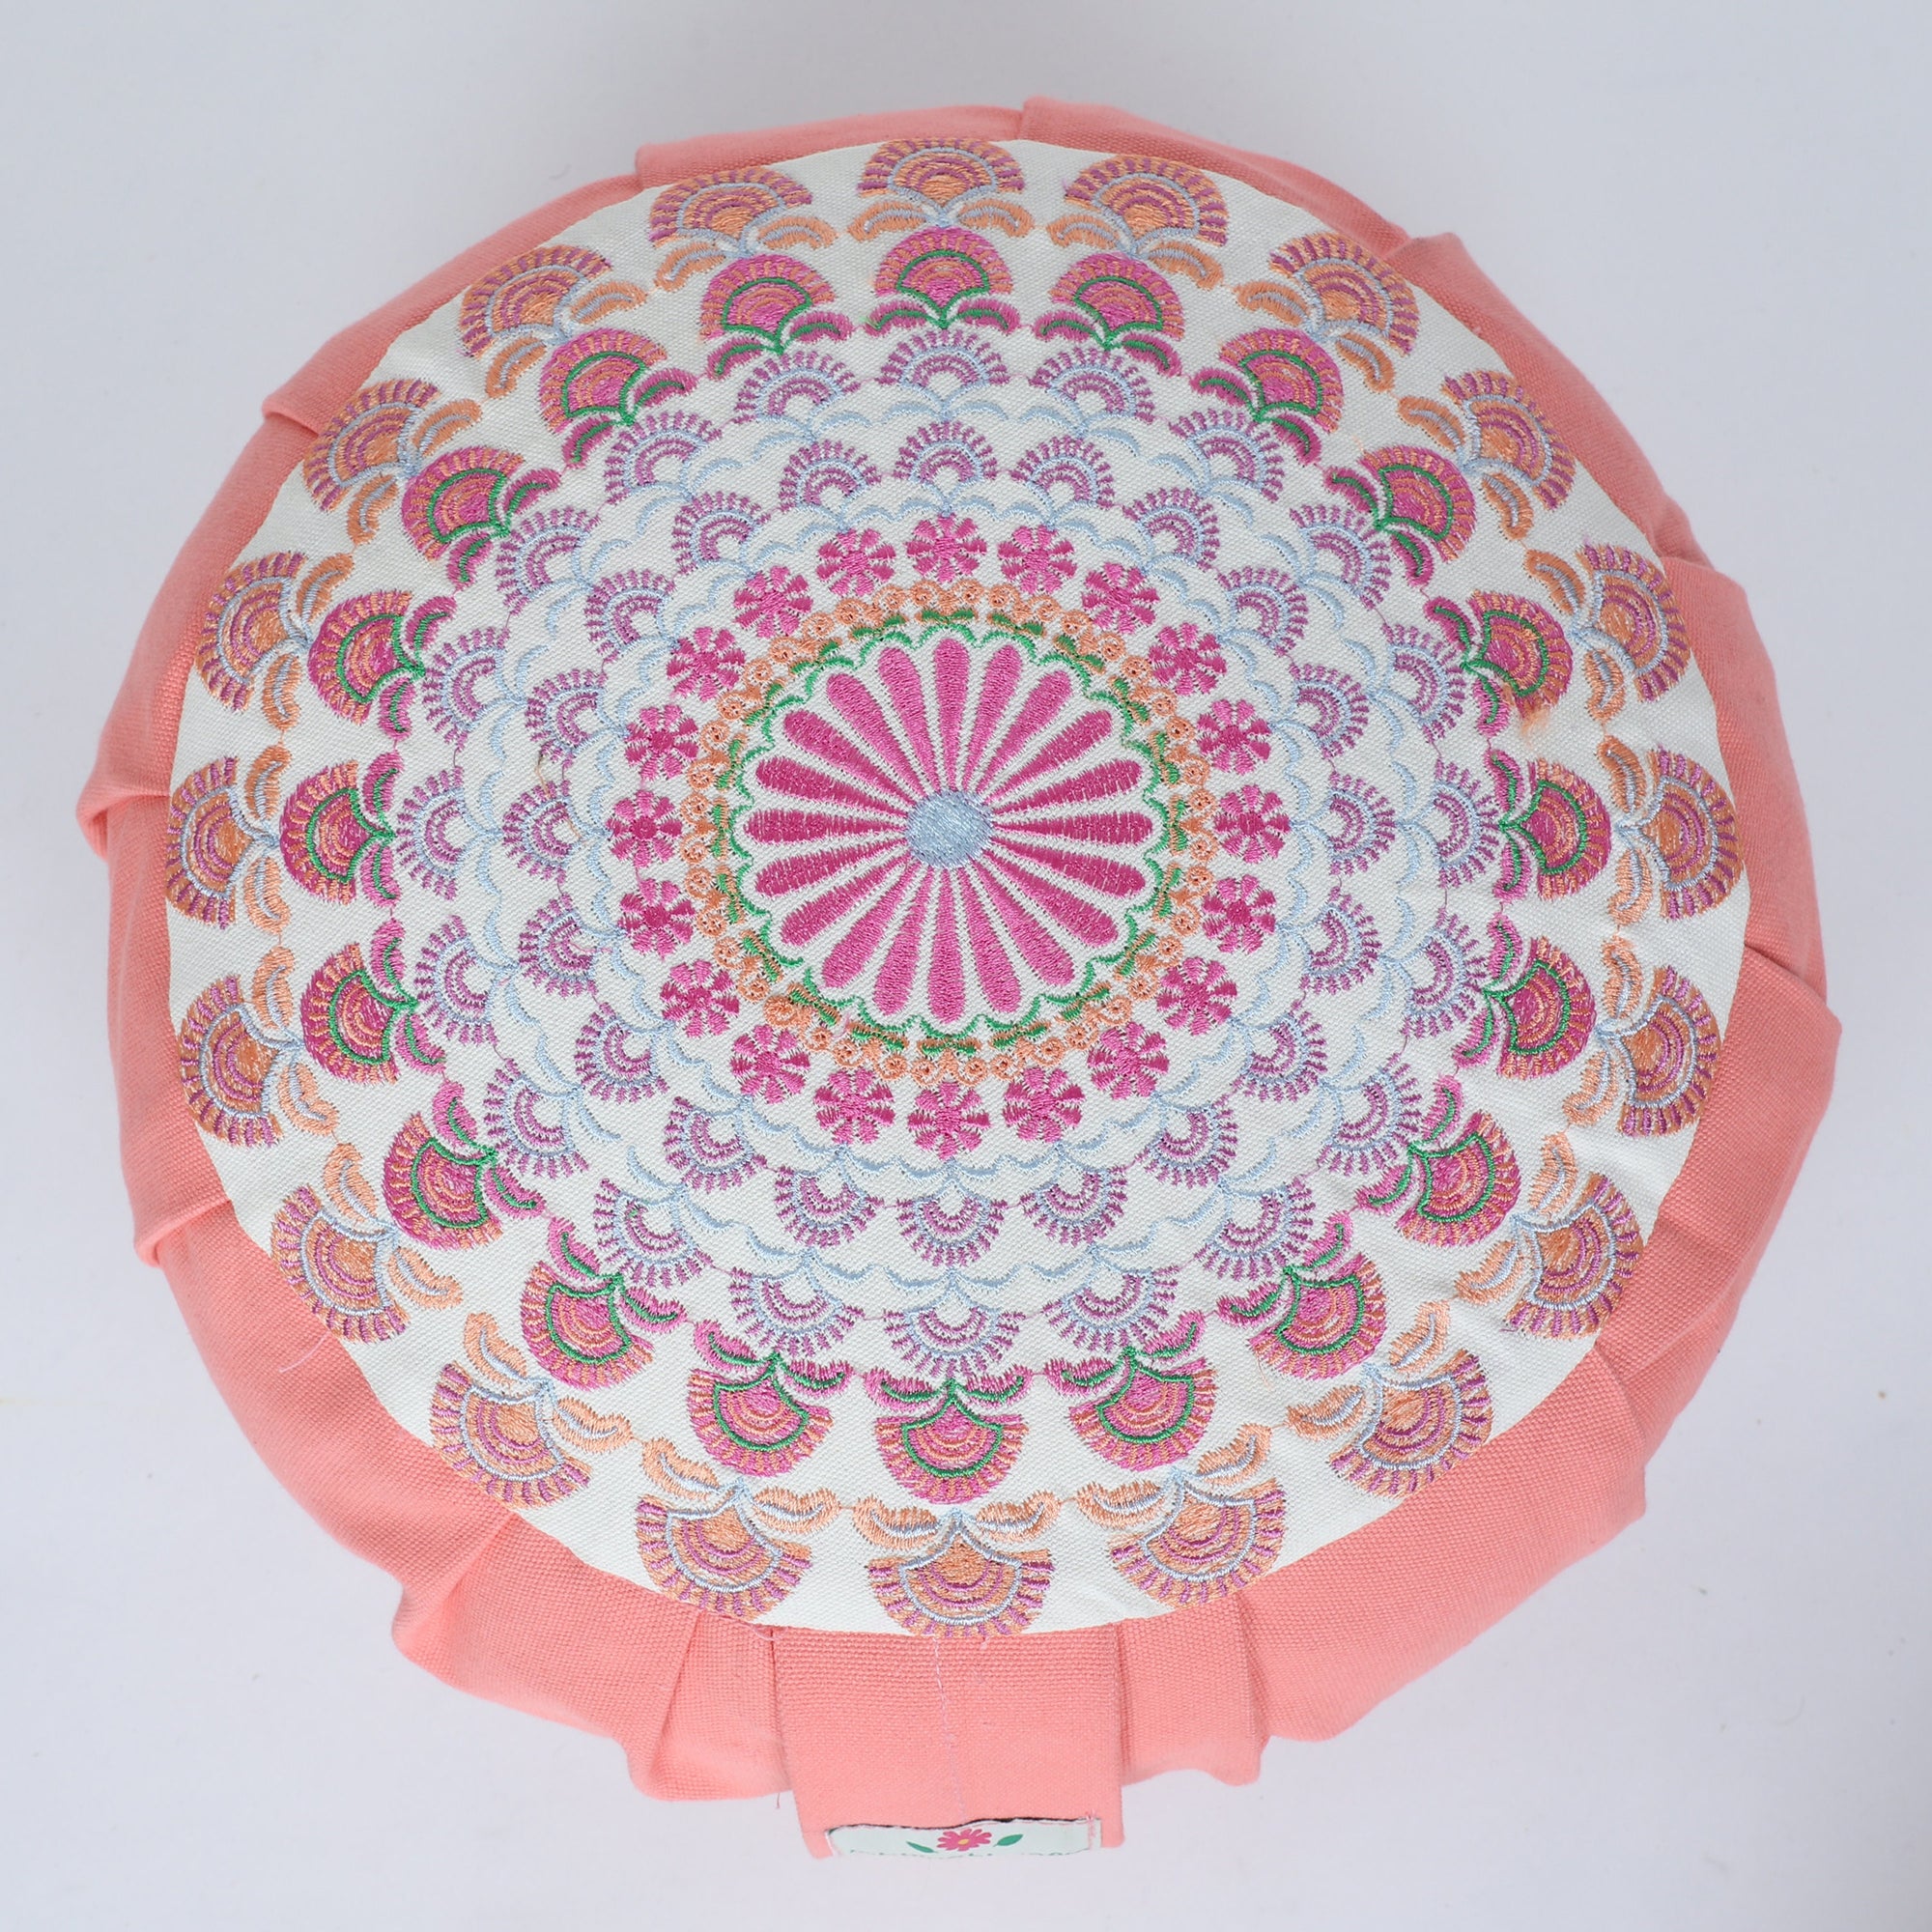 Embroidered Round Zafu Yoga Pillow |Zipped Cover |Washable| Portable - Alaknanda (Pink on PeachPink) - Size and Filling Options